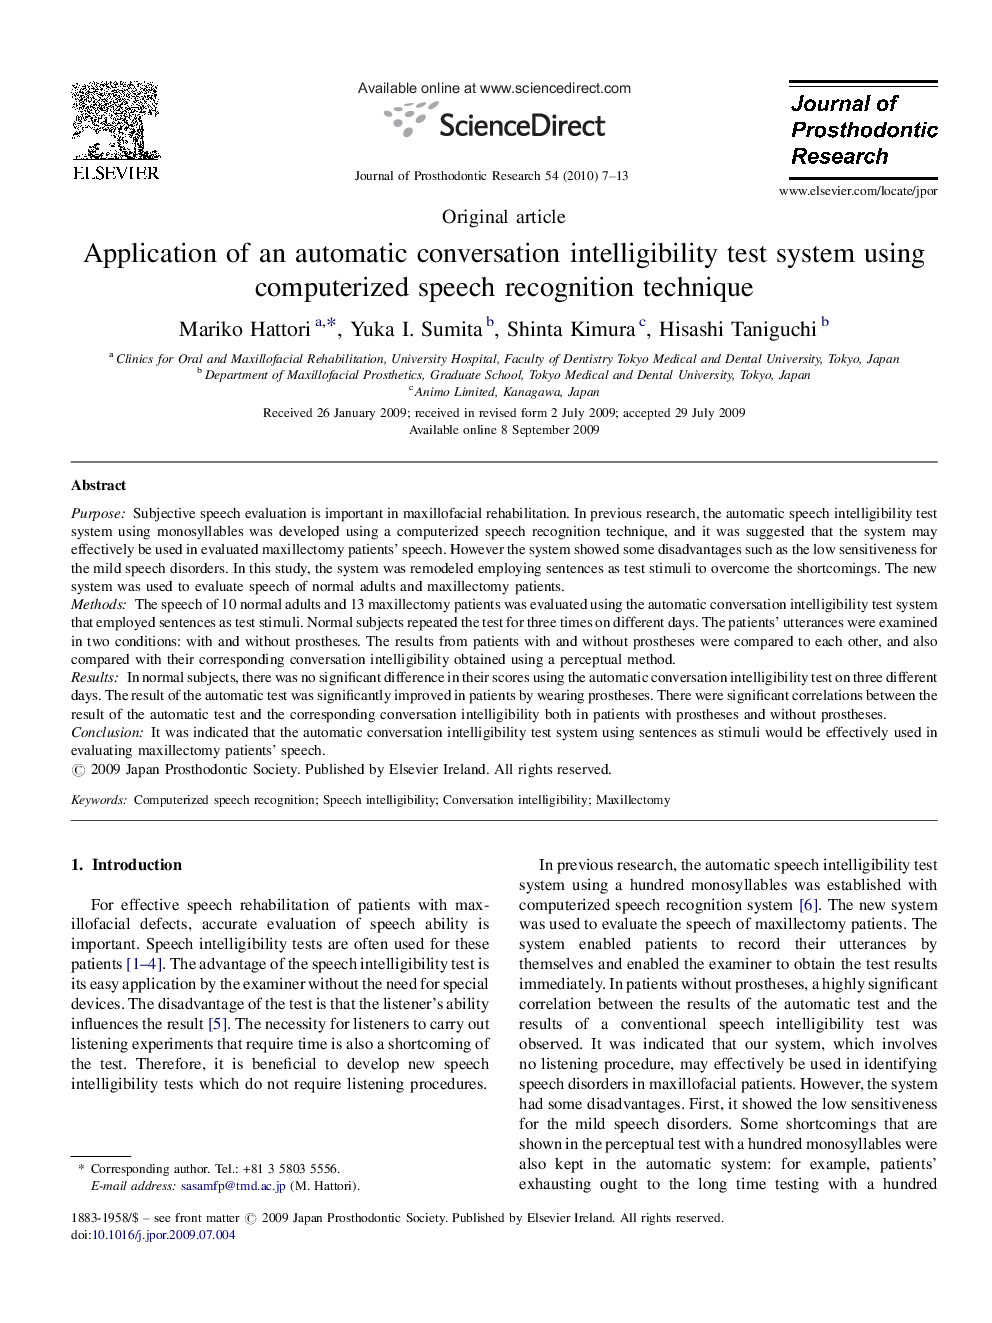 Application of an automatic conversation intelligibility test system using computerized speech recognition technique